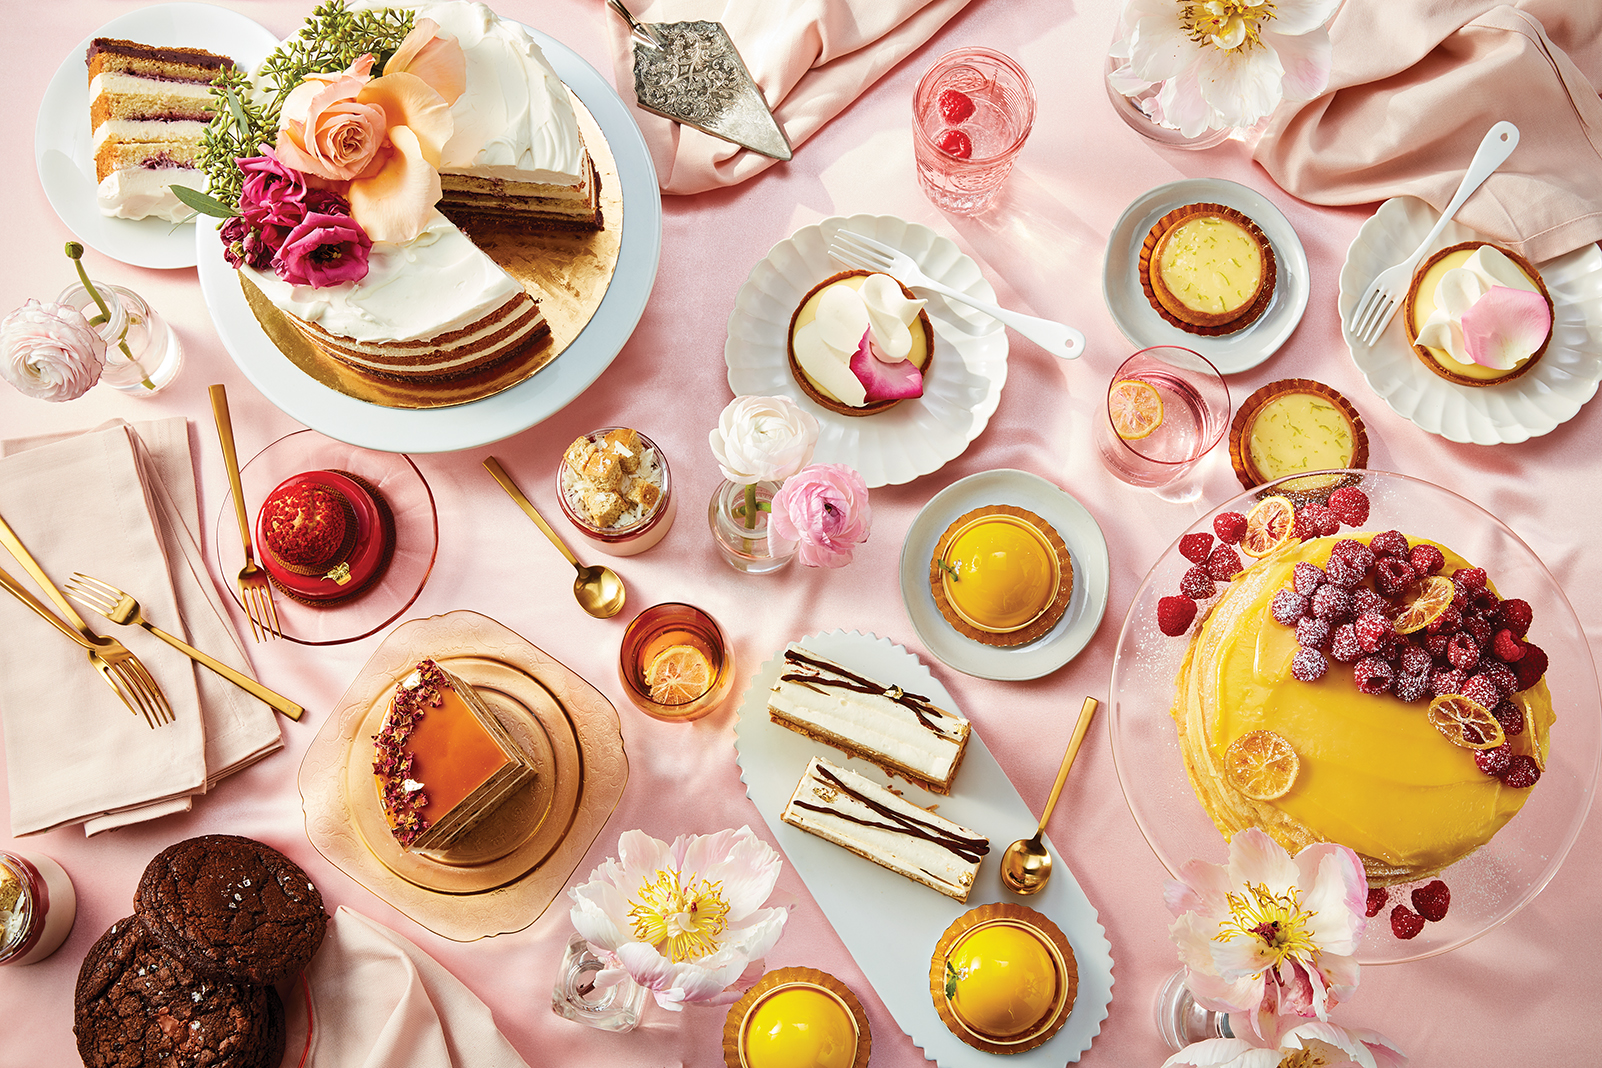 Feast your eyes. From Edwards Dessert Kitchen, Bellecour, Patisserie 46, the Copper Hen Cakery & Kitchen, and more, you'll find tons of outing-worthy desserts here in the Twin Cities.